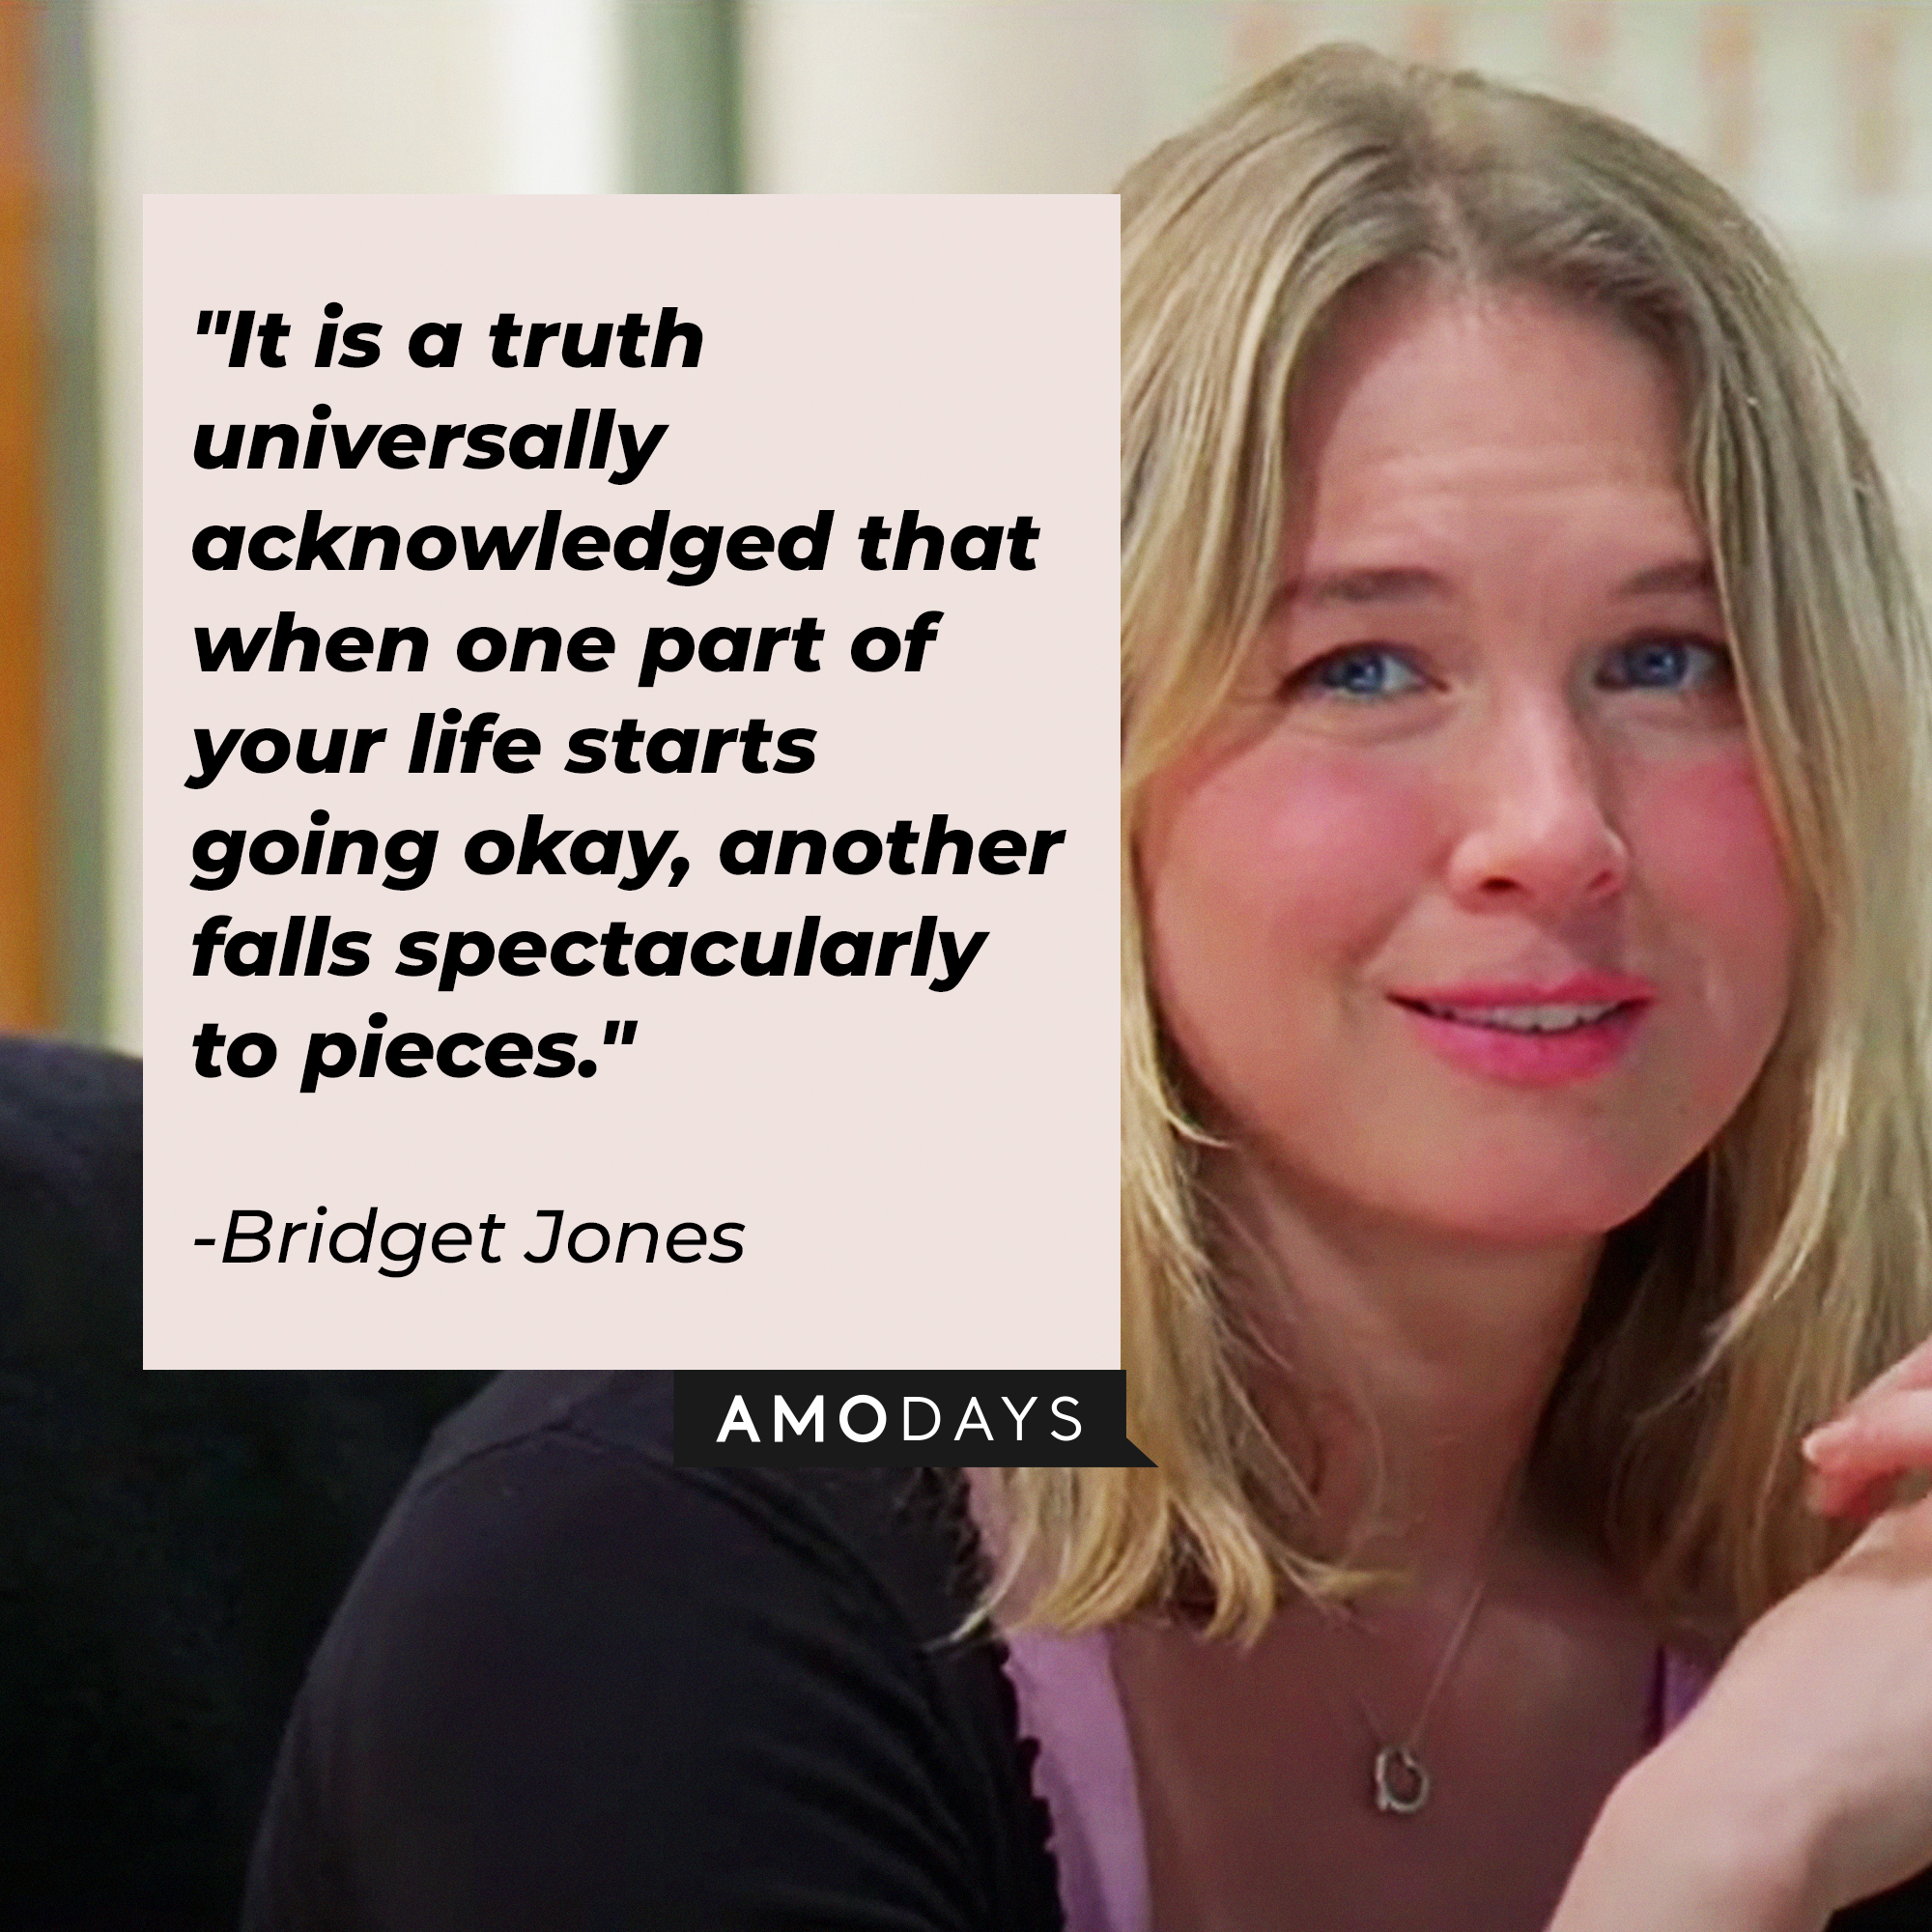 Bridget Jones with her quote in "Bridget Jones's Diary:" "It is a truth universally acknowledged that when one part of your life starts going okay, another falls spectacularly to pieces." | Source: Facebook/BridgetJonessDiary